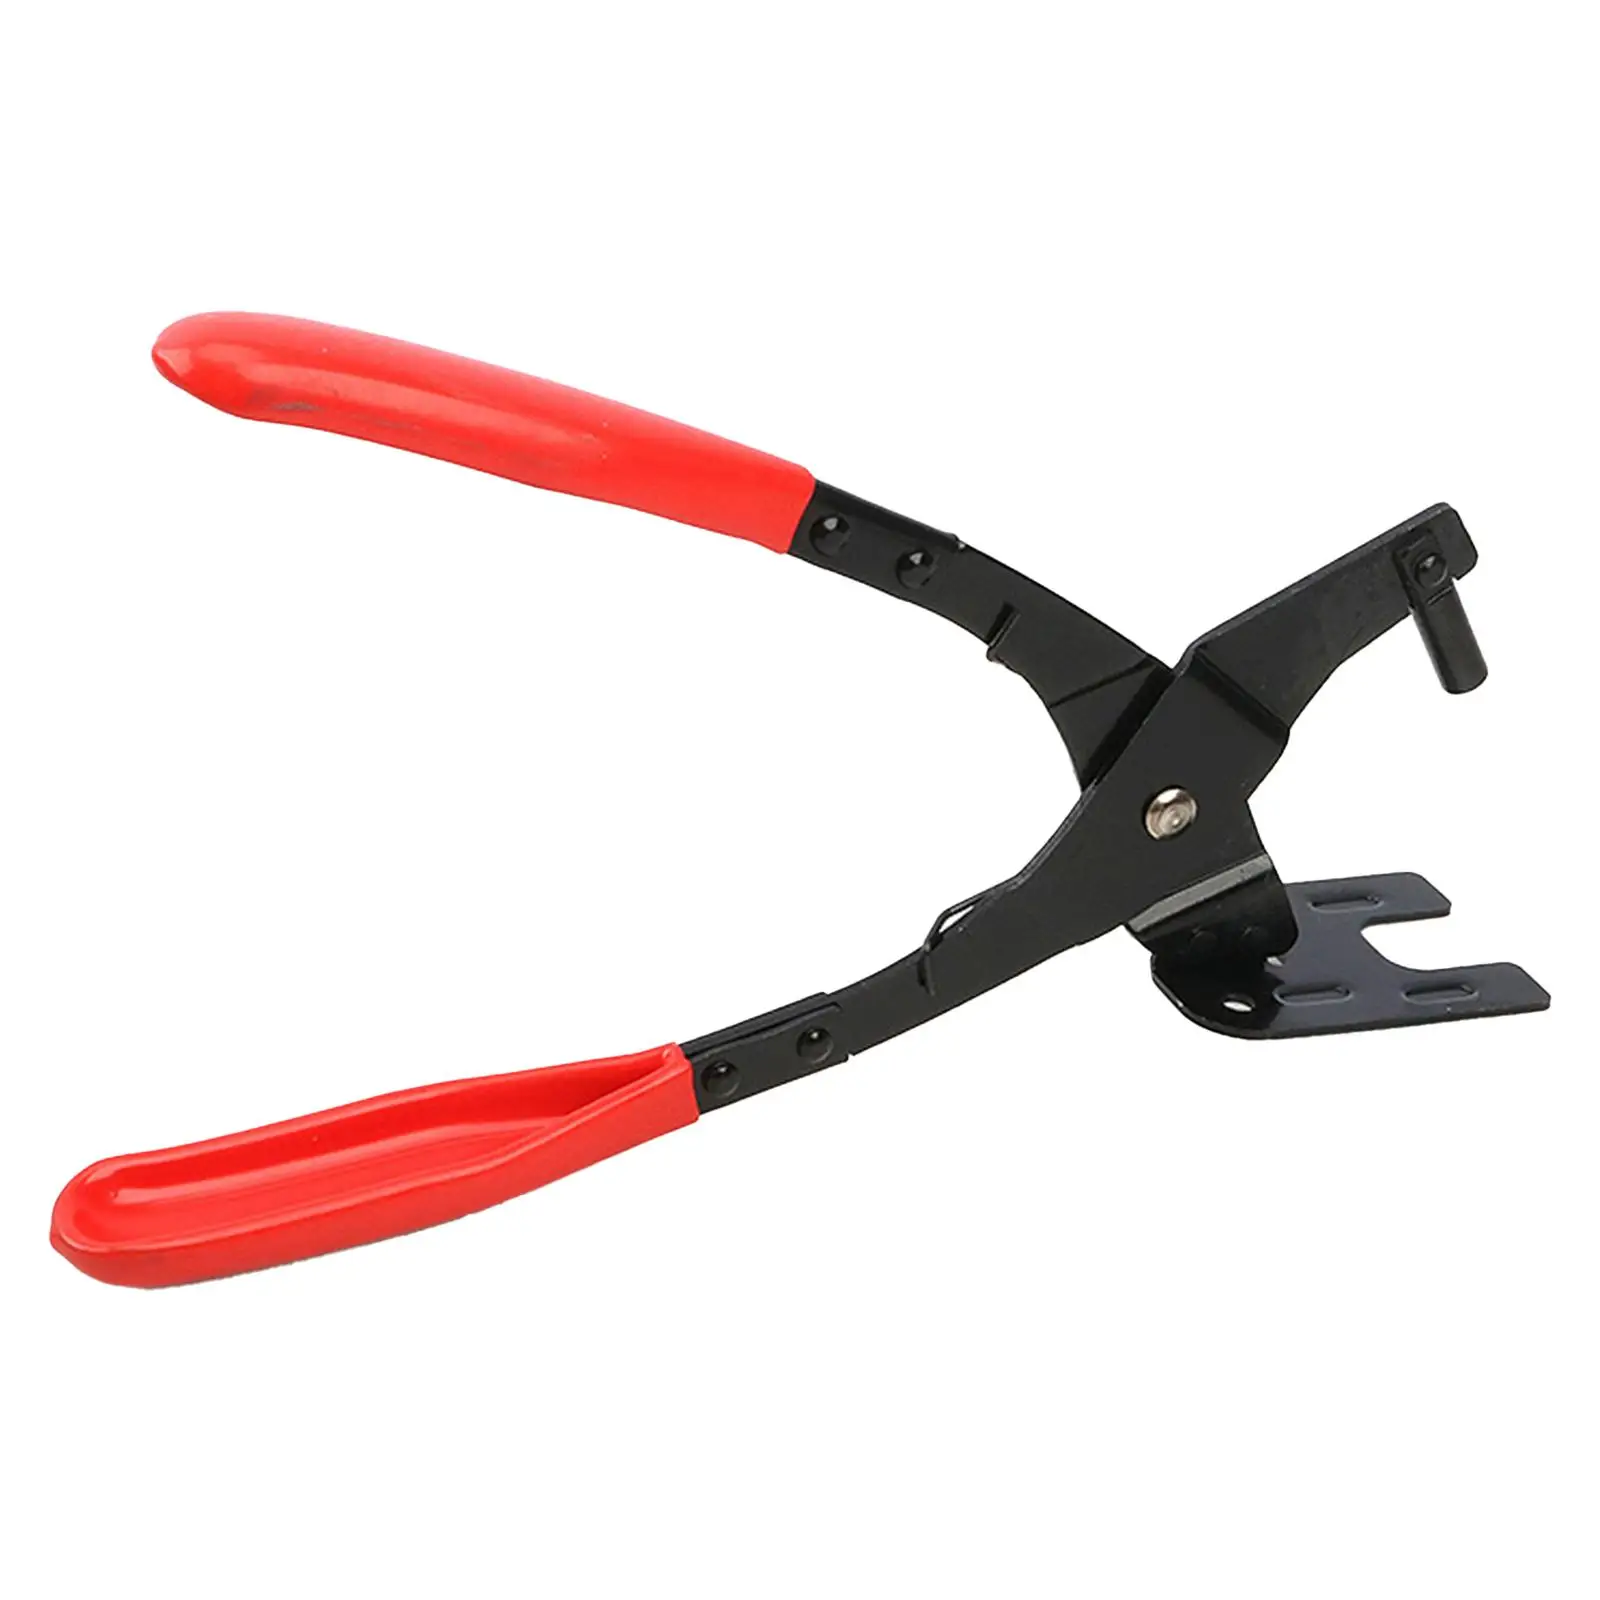 Exhaust Hanger Removal Pliers Non Slip Heavy Duty 25 Degree Offset Handles Exhaust Hanger Removal Tool for Tailpipes, Mufflers